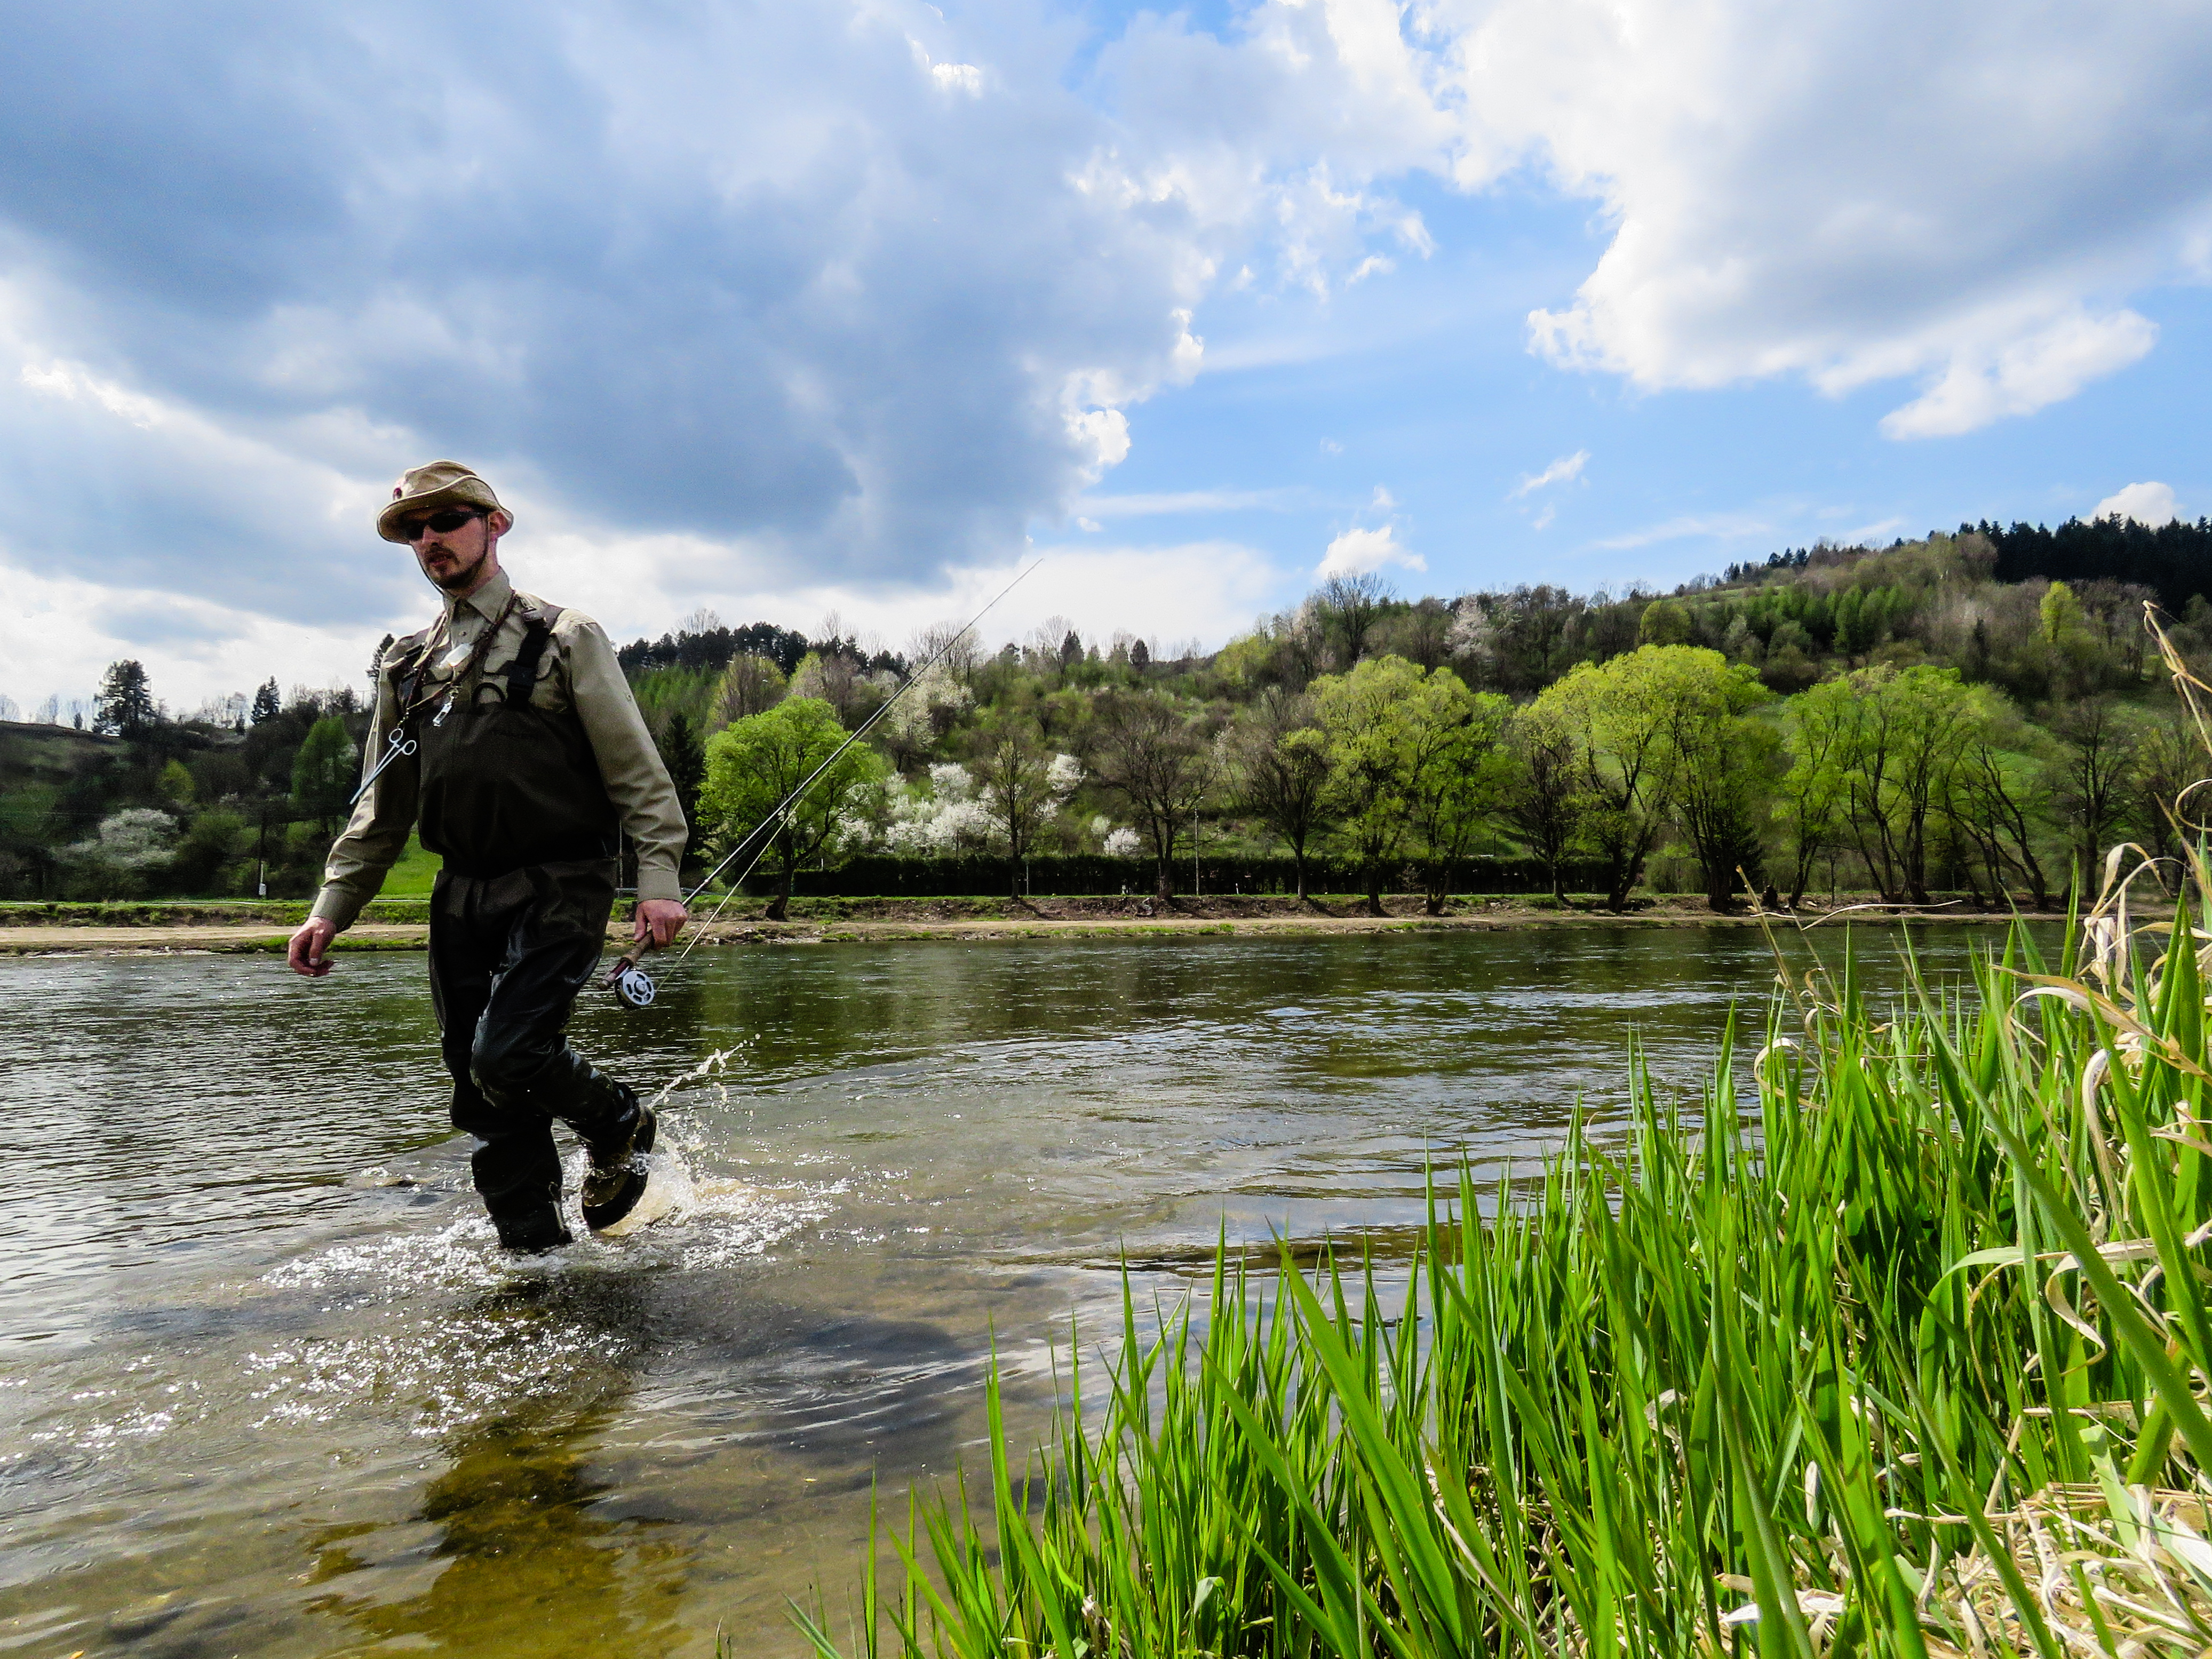 Great place for dry fly fishing in spring. Fly fishing in Poland